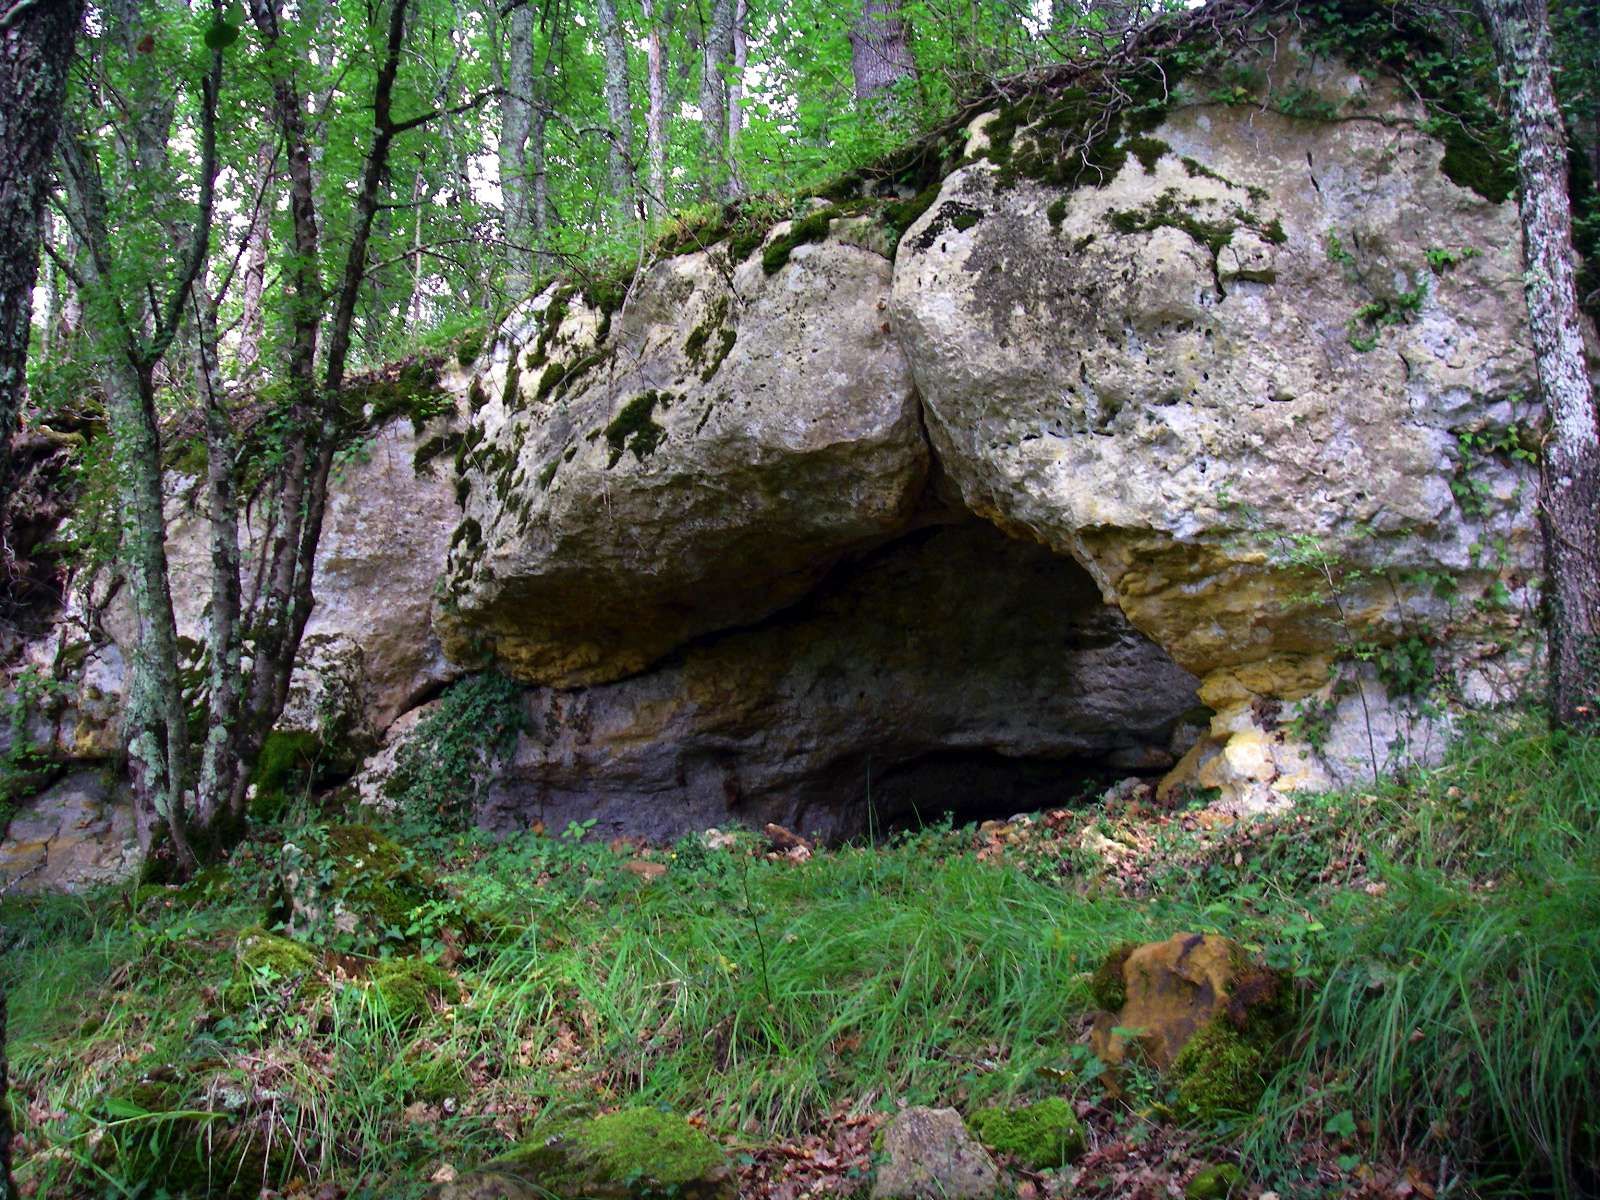 Combe-Capelle, Neanderthal site in Southern France